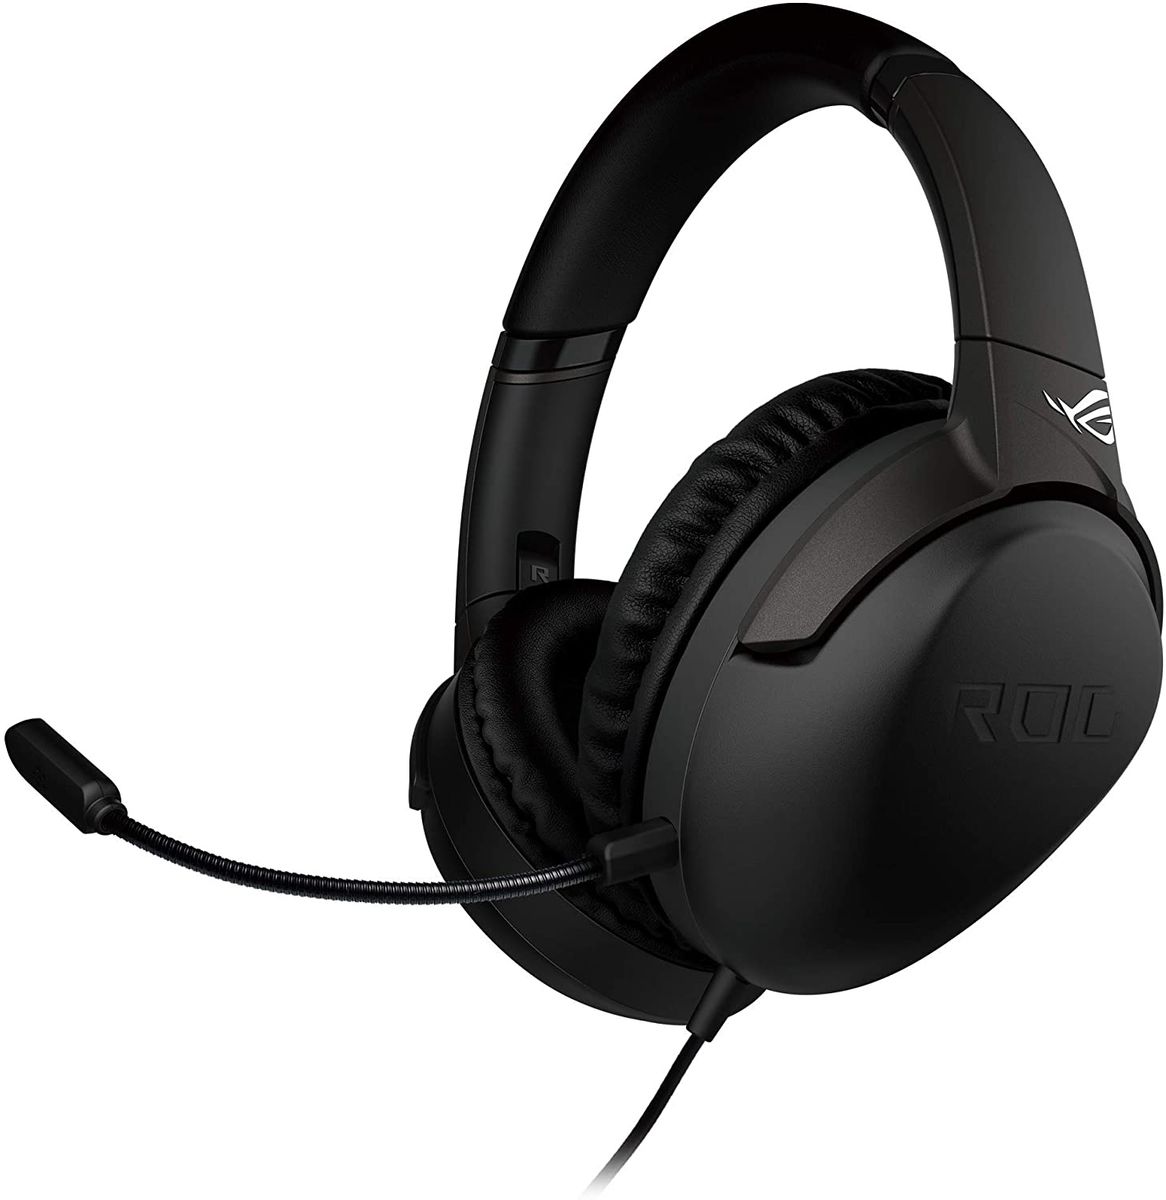 ASUS ROG Strix Go Gaming Headphones with USB-C Adapter | Ai Powered Noise-Cancelling Microphone | Over-Ear Headphones